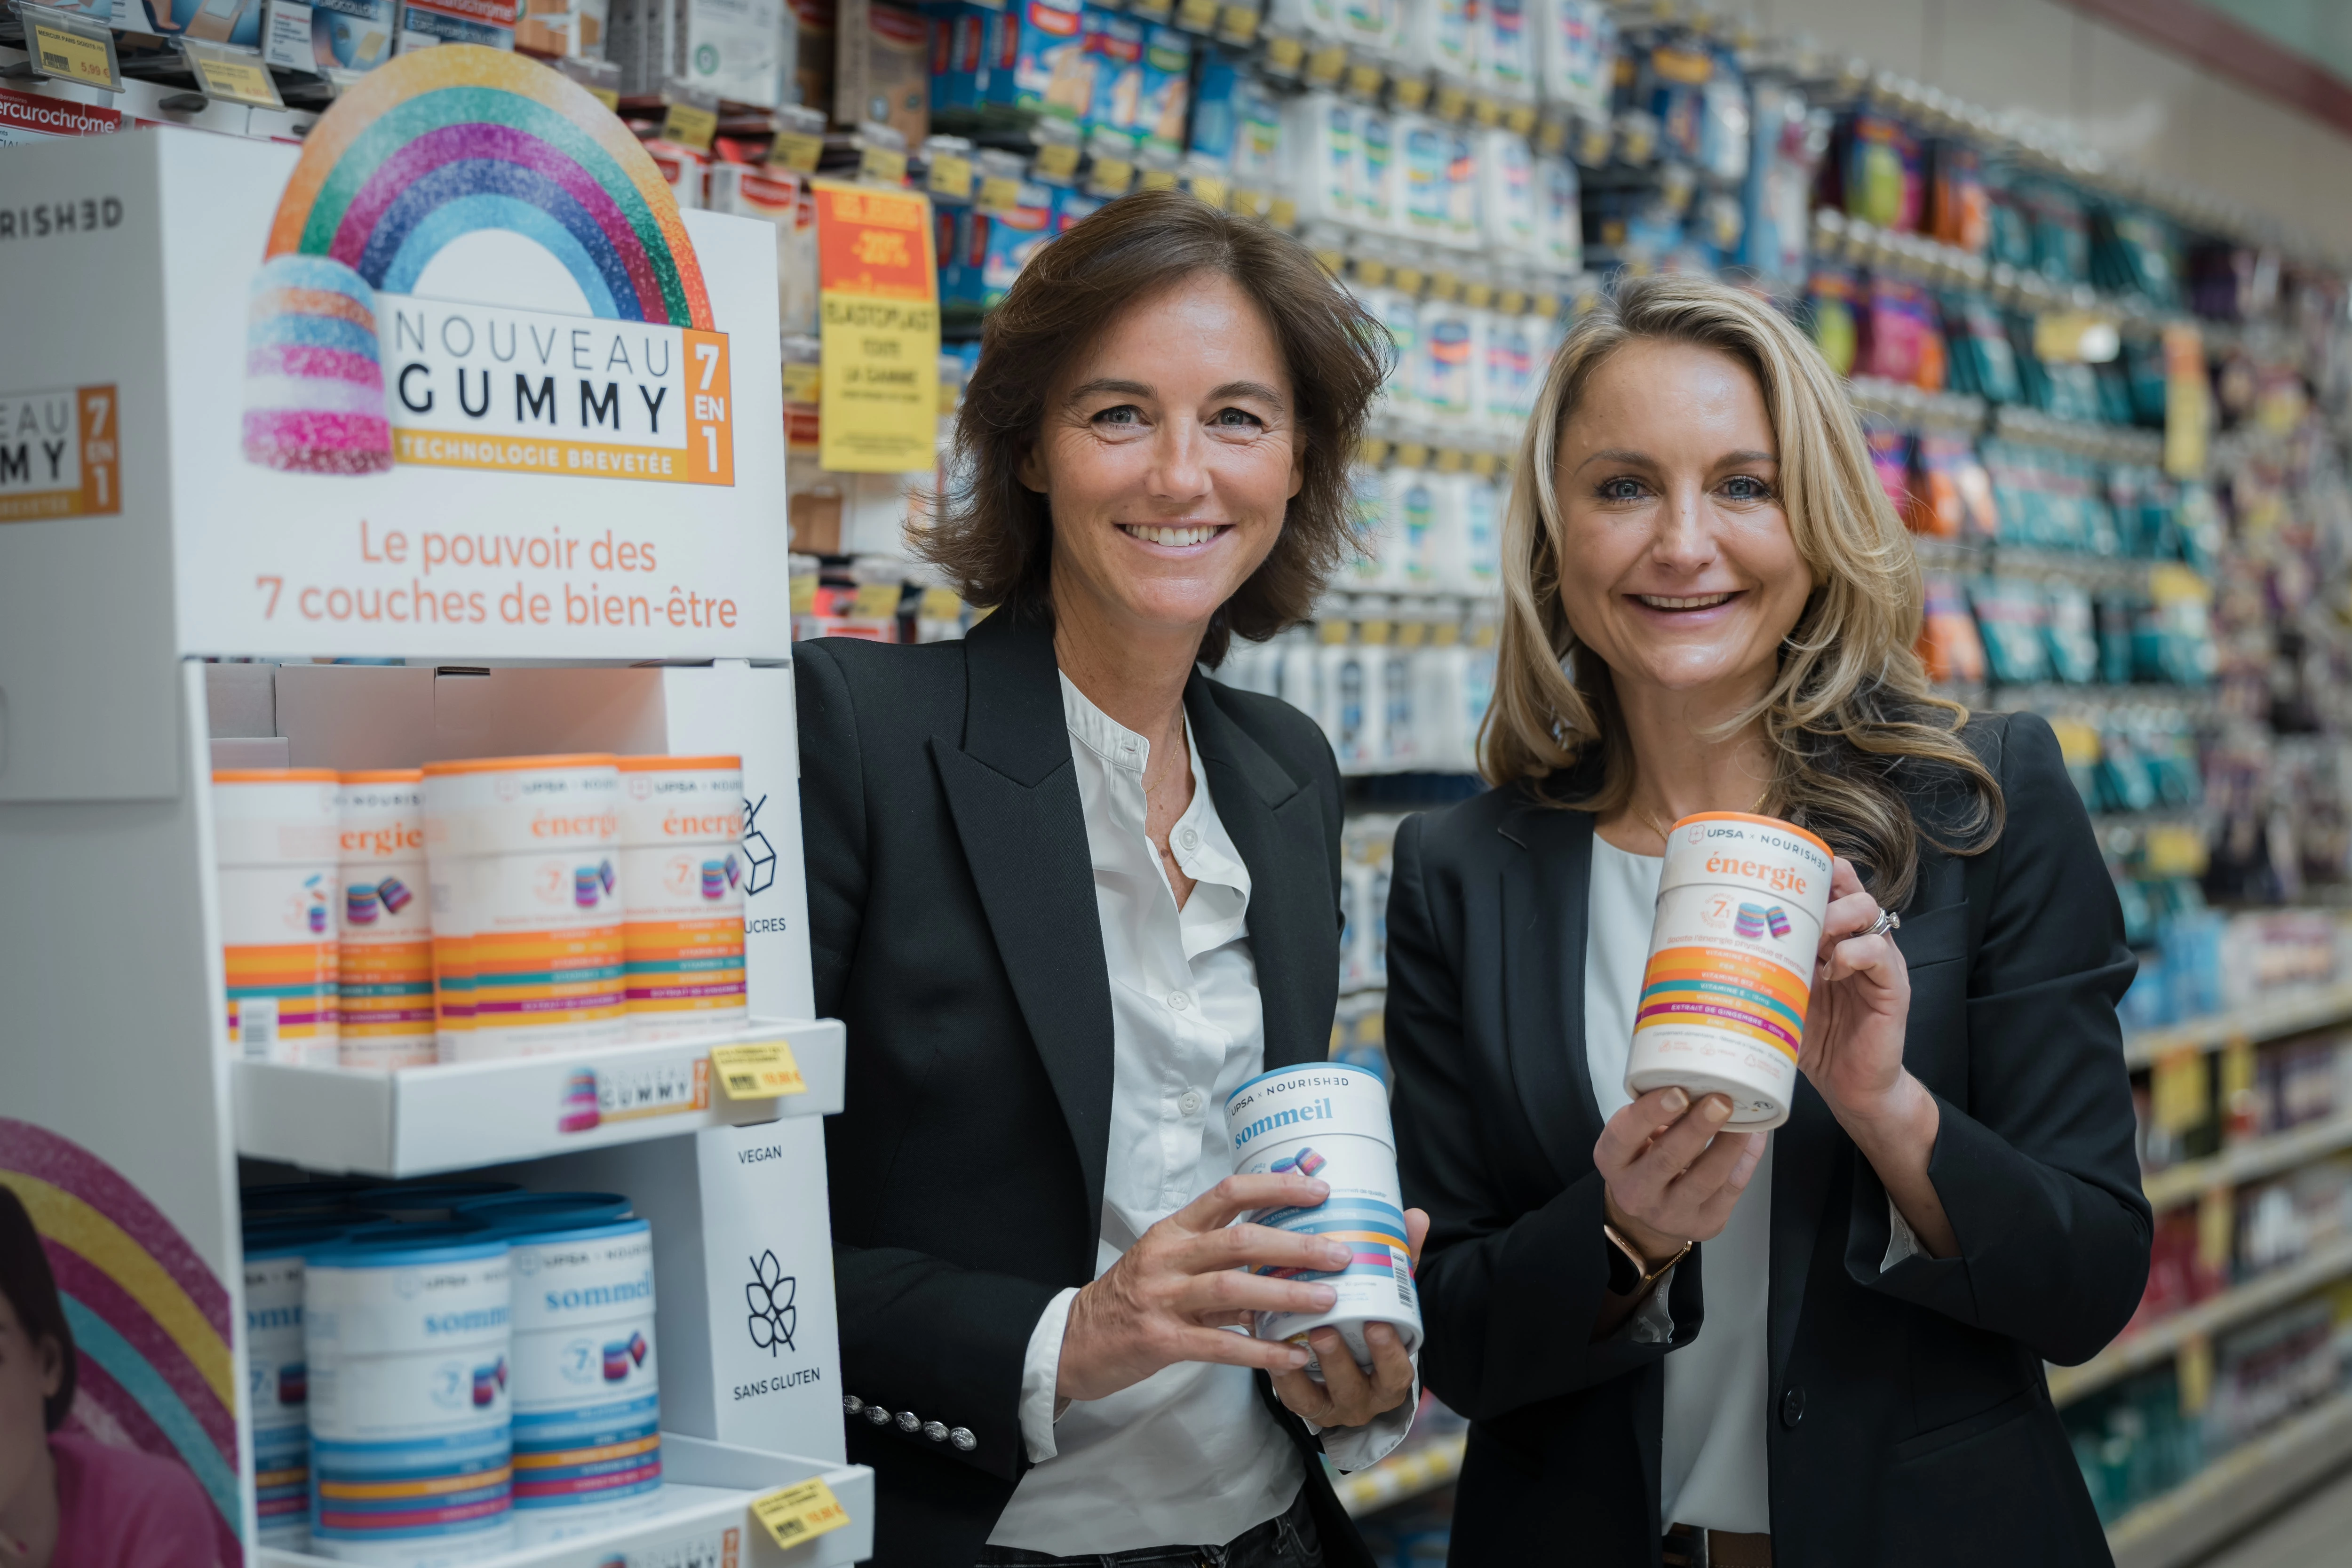 Isabelle Van Rycke, President and CEO of UPSA (L) and Melissa Snover, Founder & CEO of Rem3dy Health LTD (R)